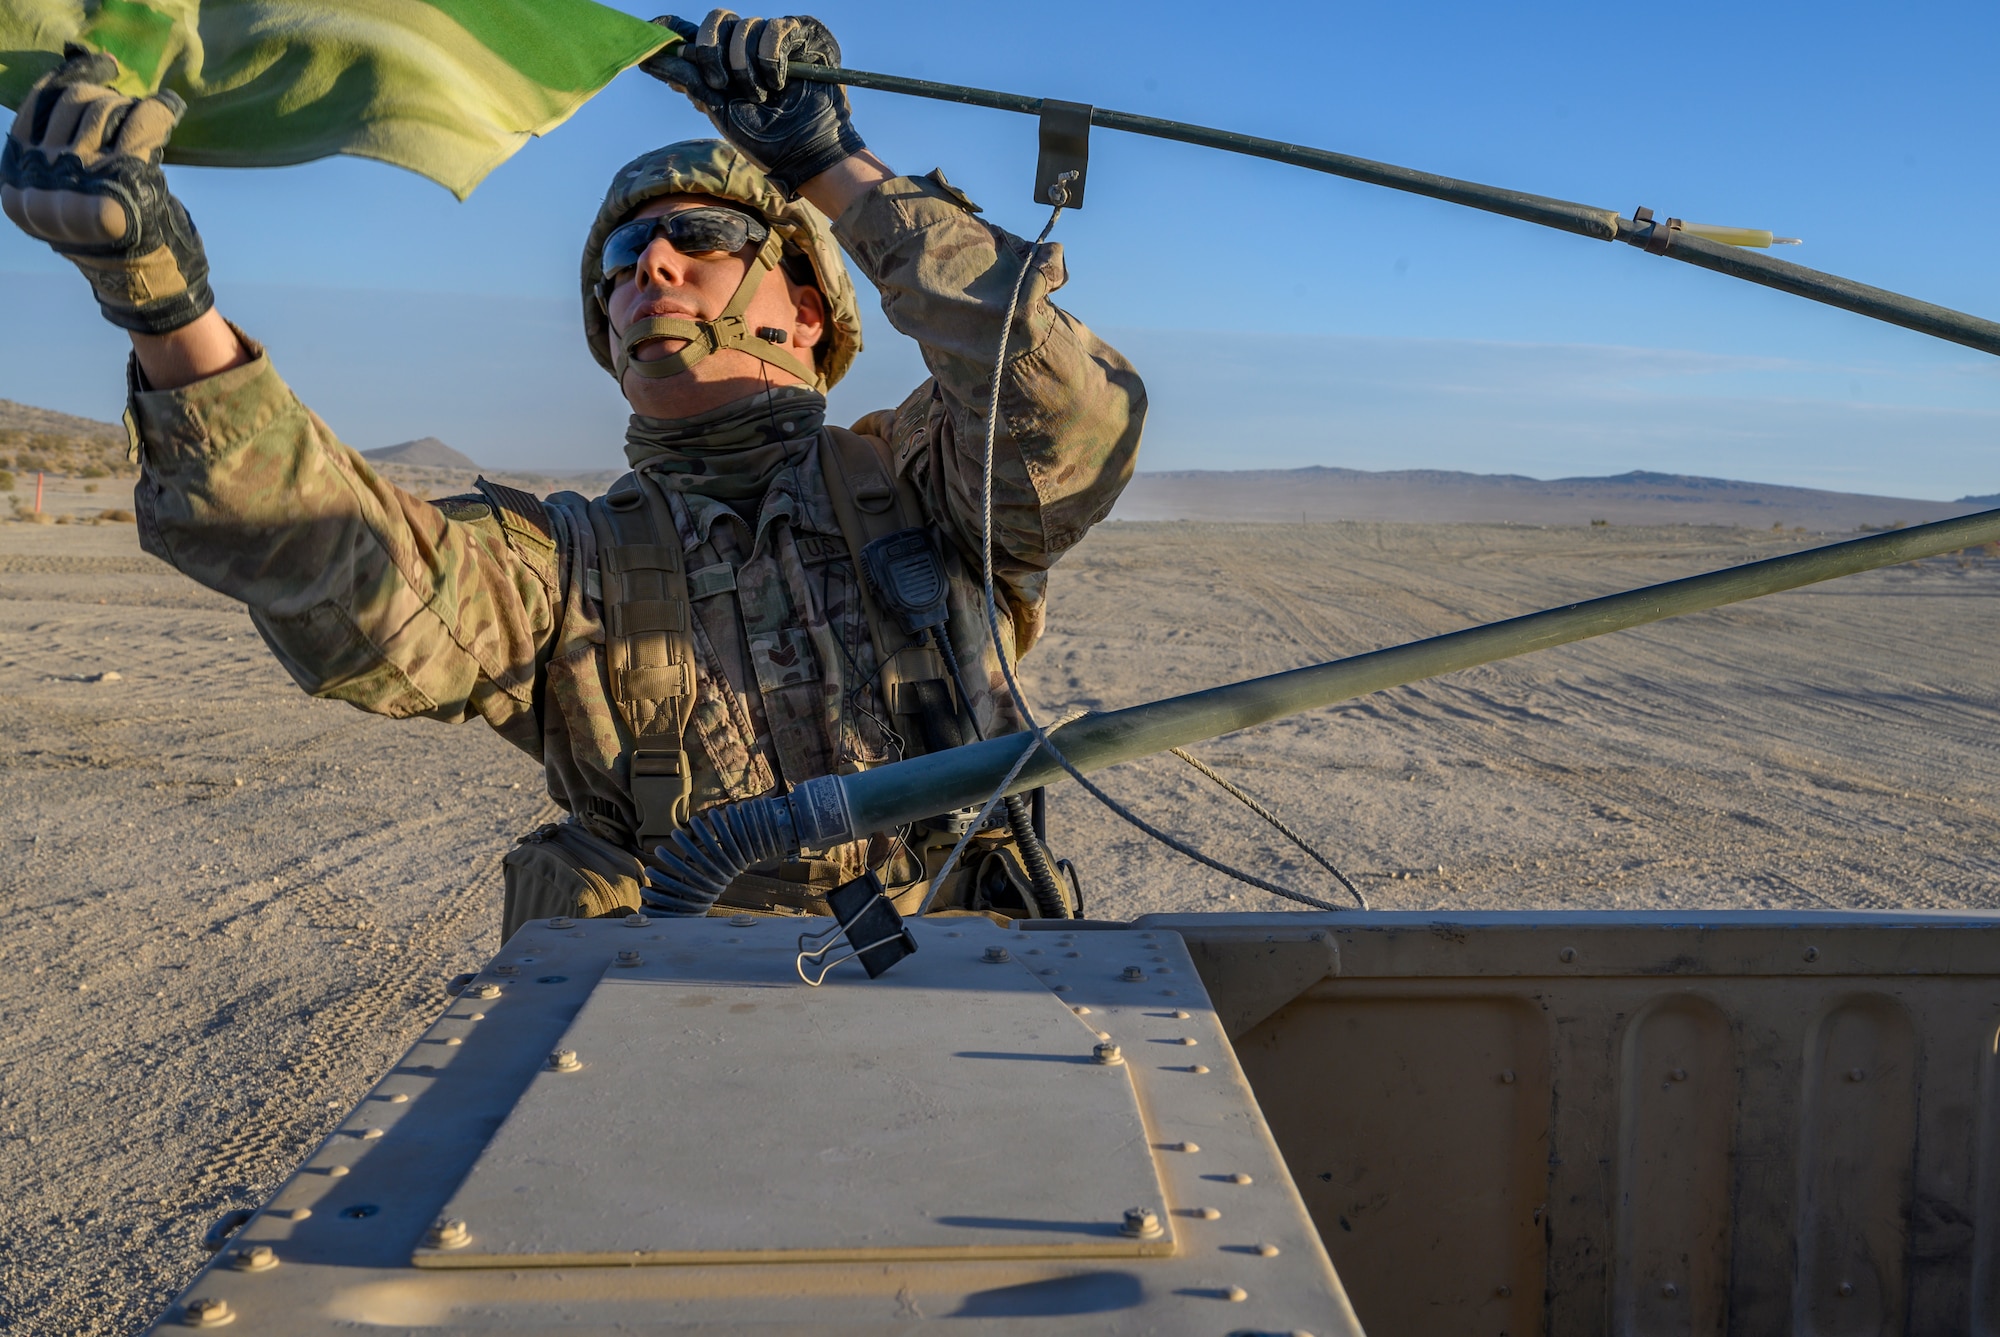 Airman grabs a flag on the back of a Humvee.